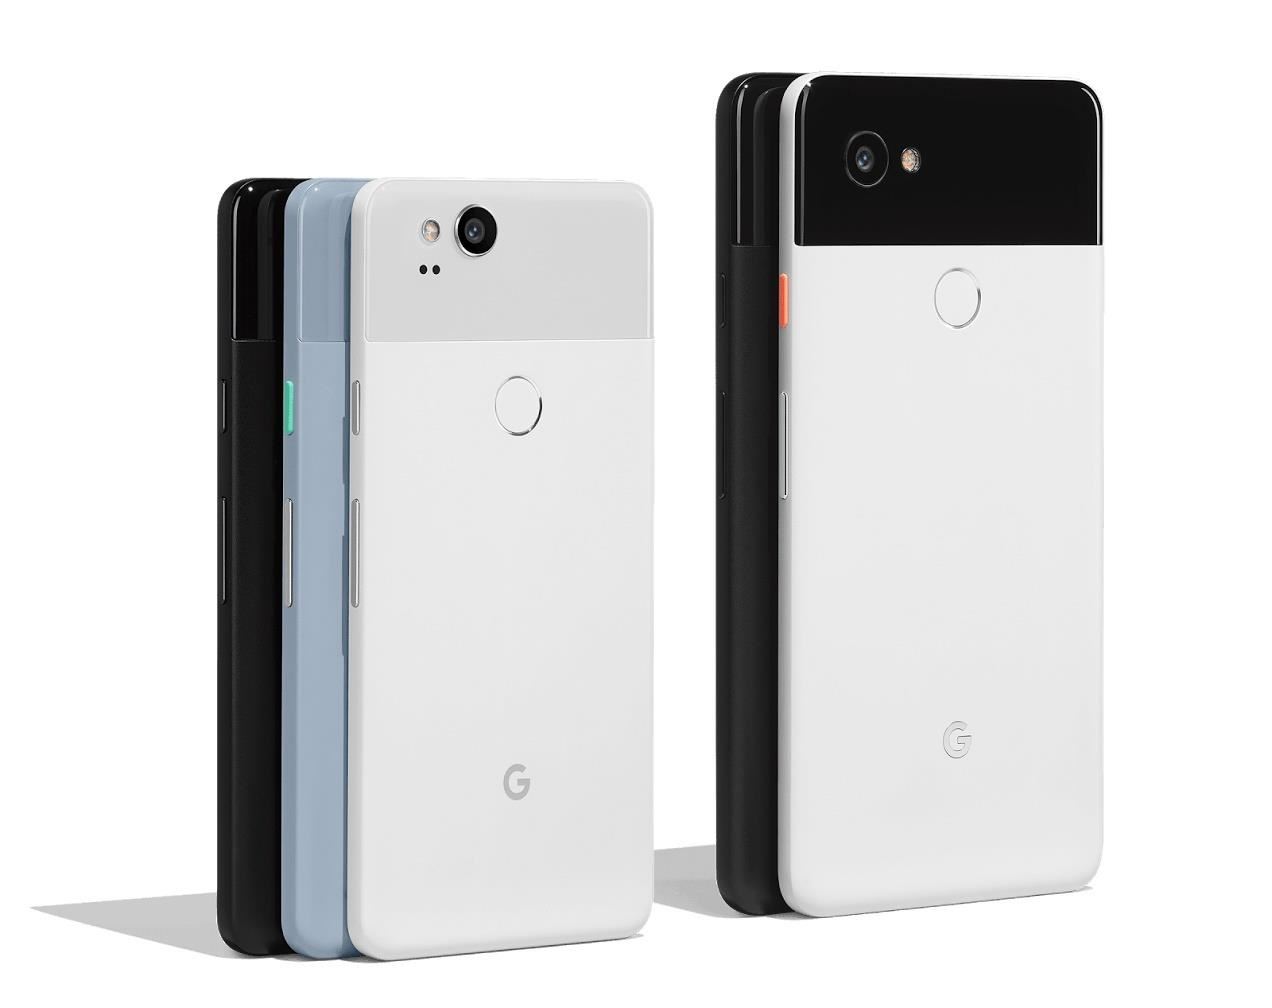 Everything You Need to Know About the Google Pixel 2 — Specs, Features & More